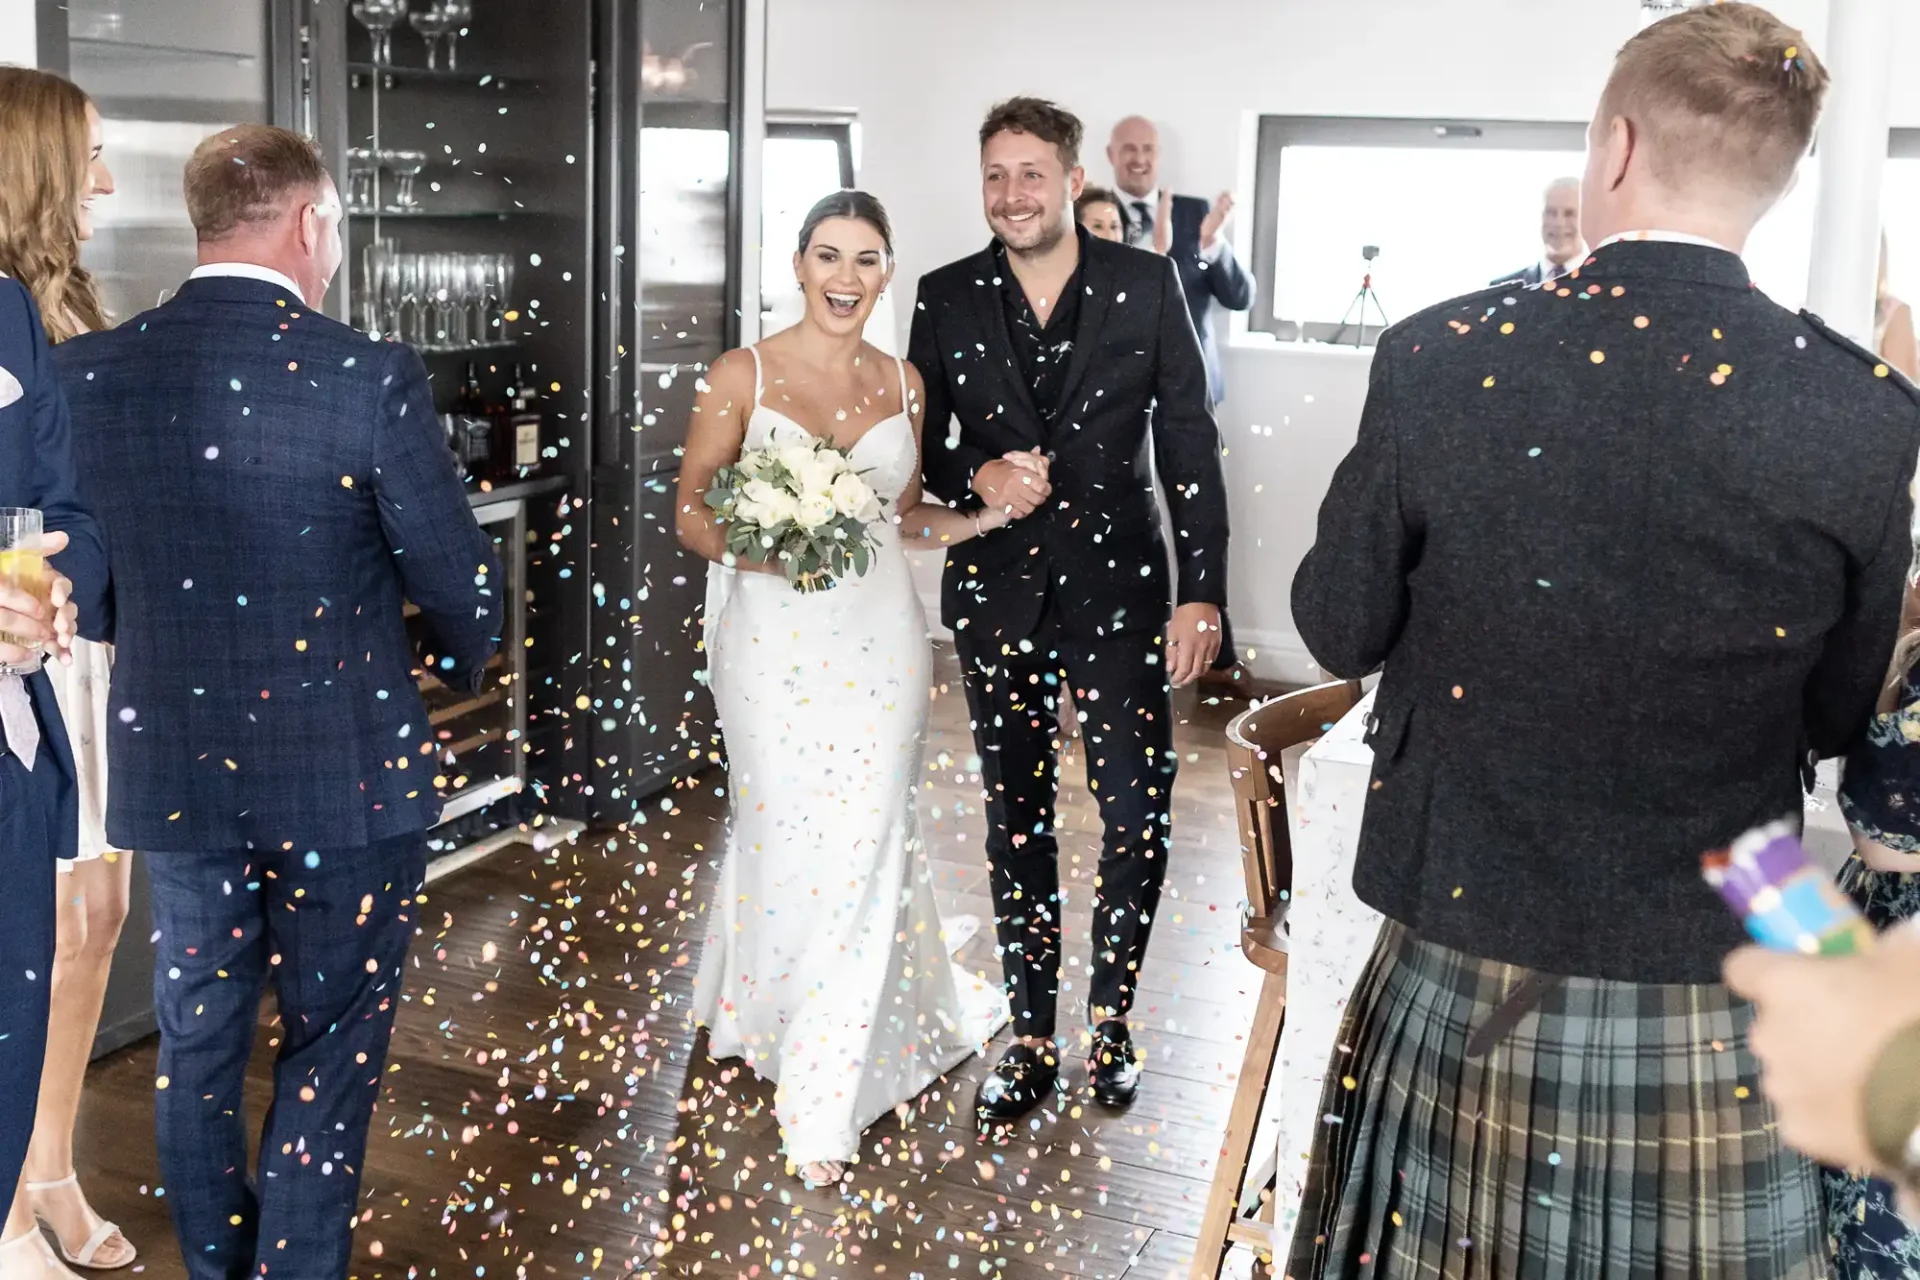 A newlywed couple walks happily through a crowd throwing confetti, smiling broadly in a stylishly decorated room.